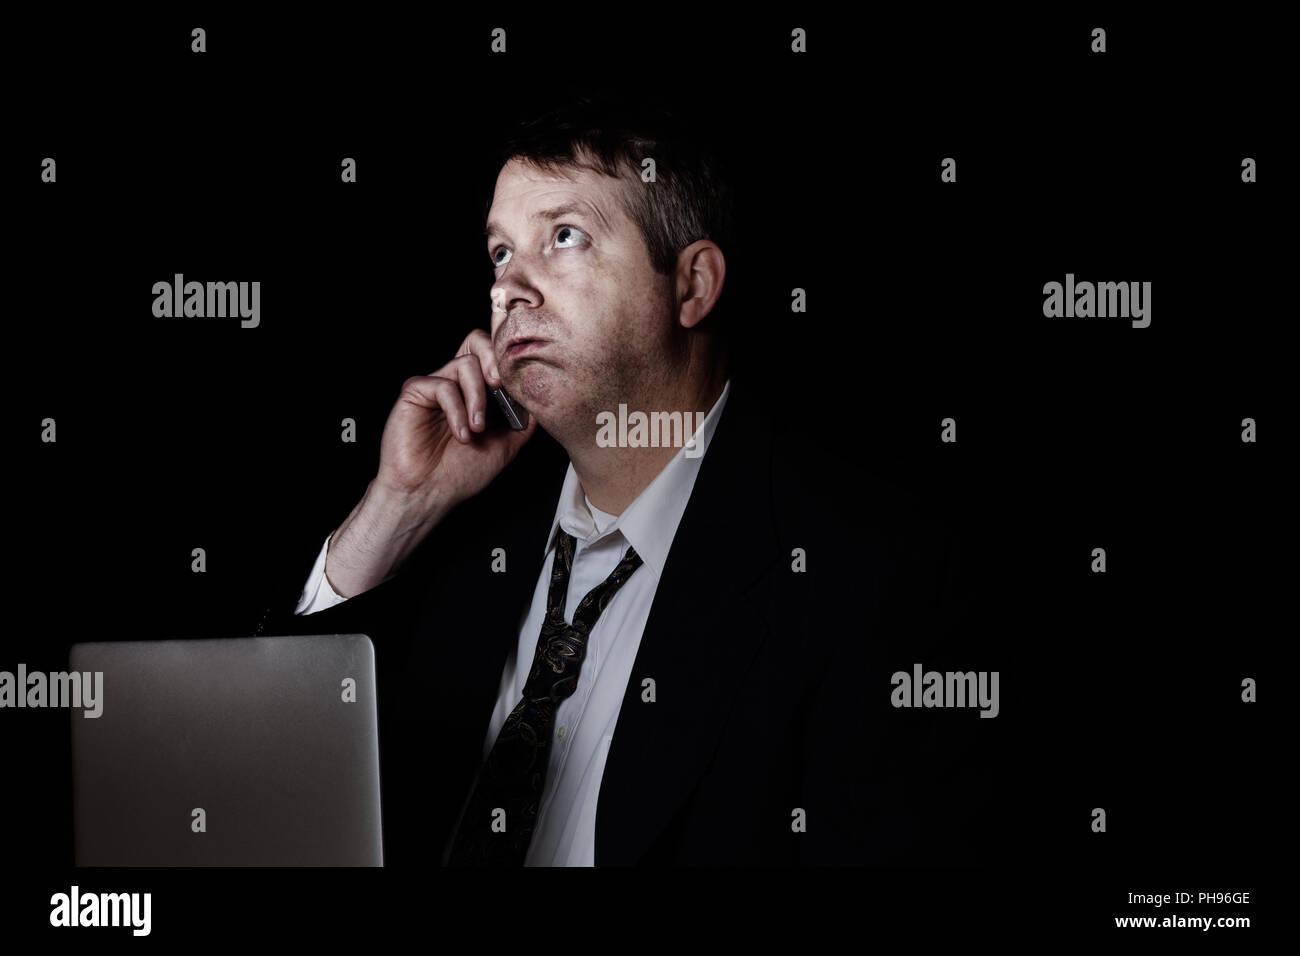 Stressed man listening on cell phone in the darkness Stock Photo